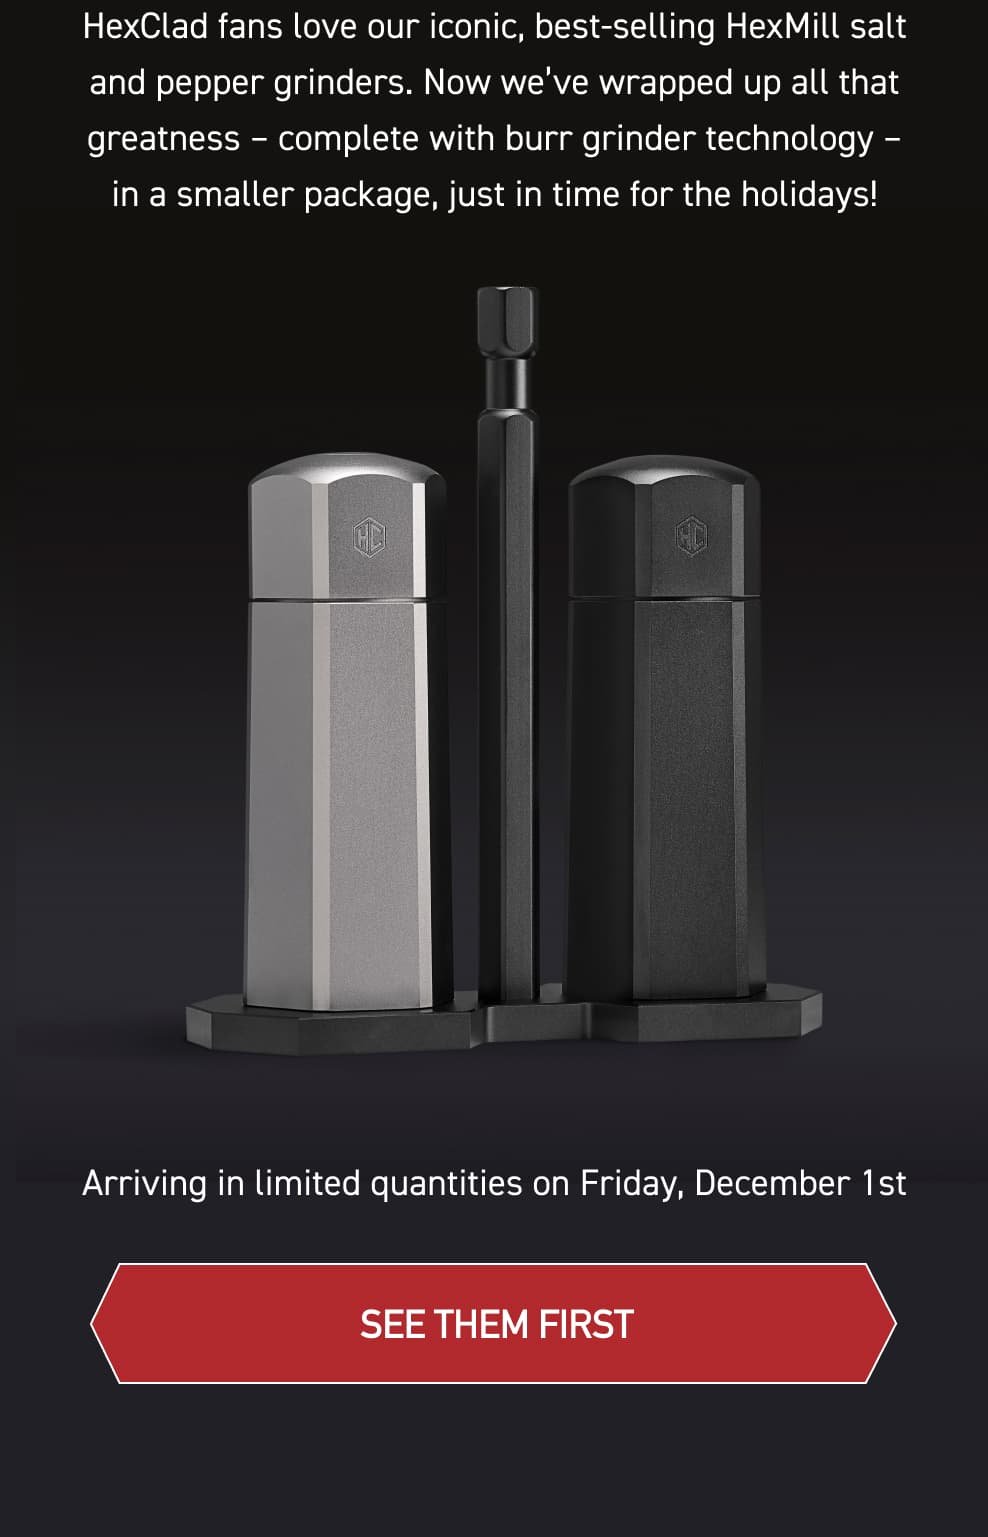 HexClad fans love our iconic, best-selling HexMill salt and pepper grinders. Now we’ve wrapped up all that greatness – complete with burr grinder technology – in a smaller package, just in time for the holidays. Arriving in Limited quantities on Friday, December 1st [SEE THEM IN ACTION]